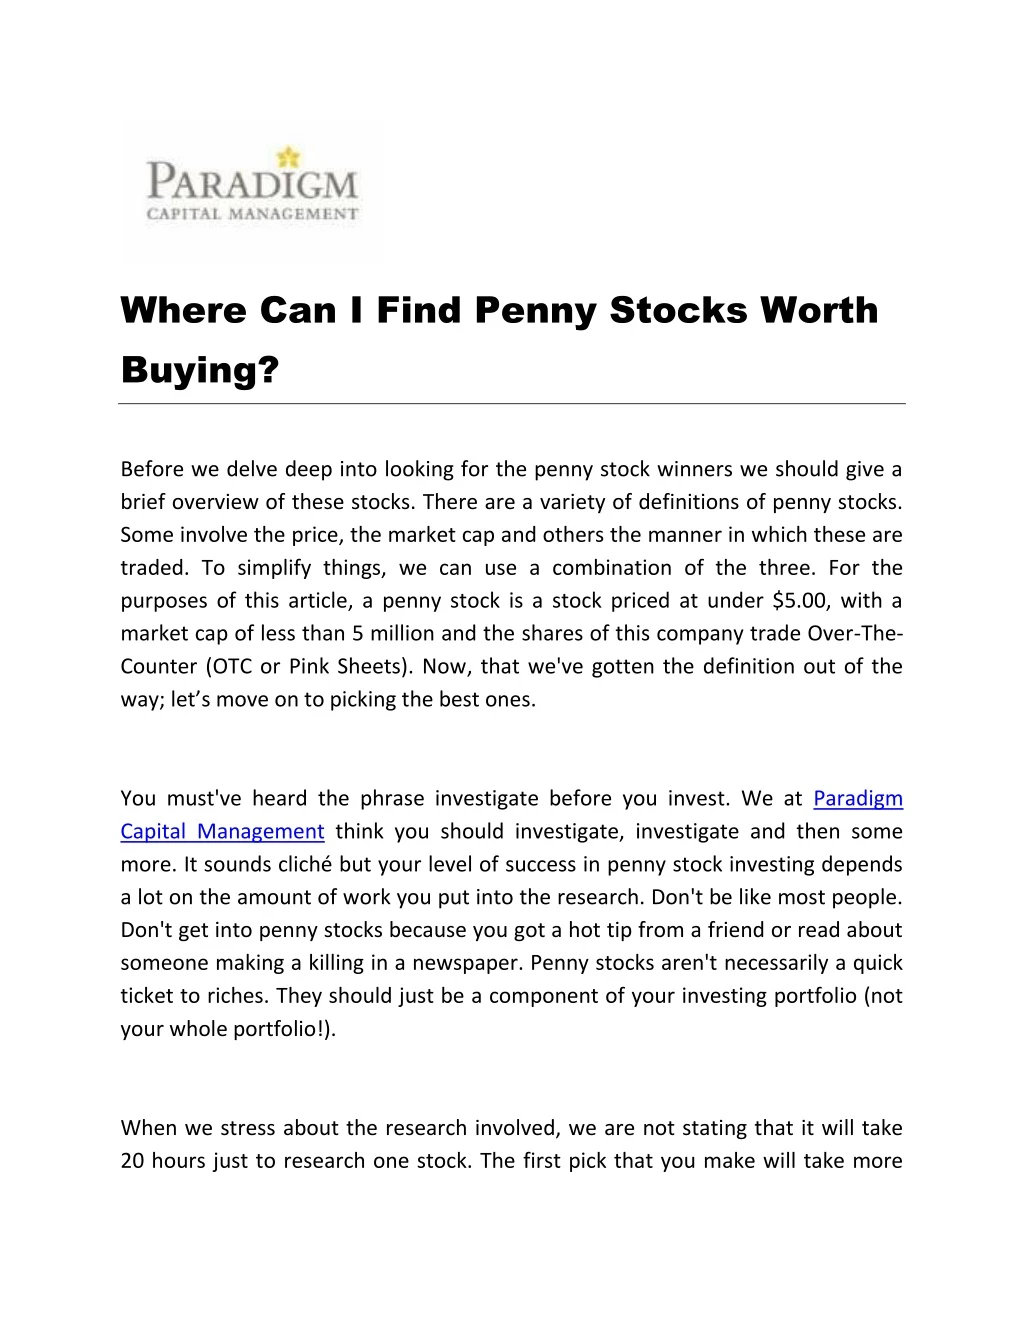 where can i find penny stocks worth buying